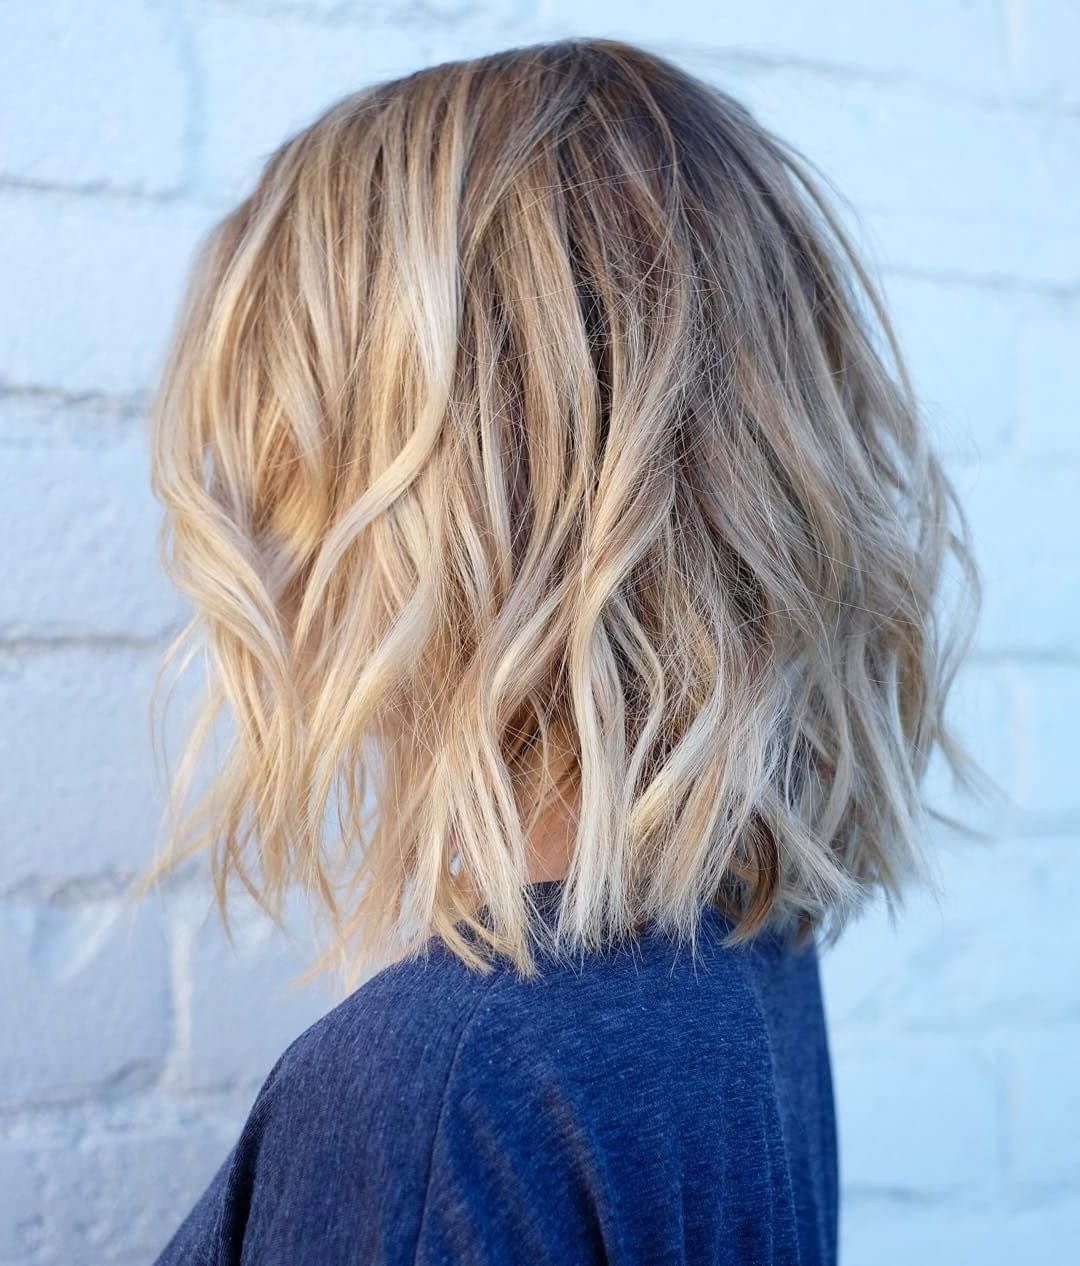 50 Fresh Short Blonde Hair Ideas To Update Your Style In 2018 For Most Recently Released Tousled Shoulder Length Waves Blonde Hairstyles (View 16 of 20)